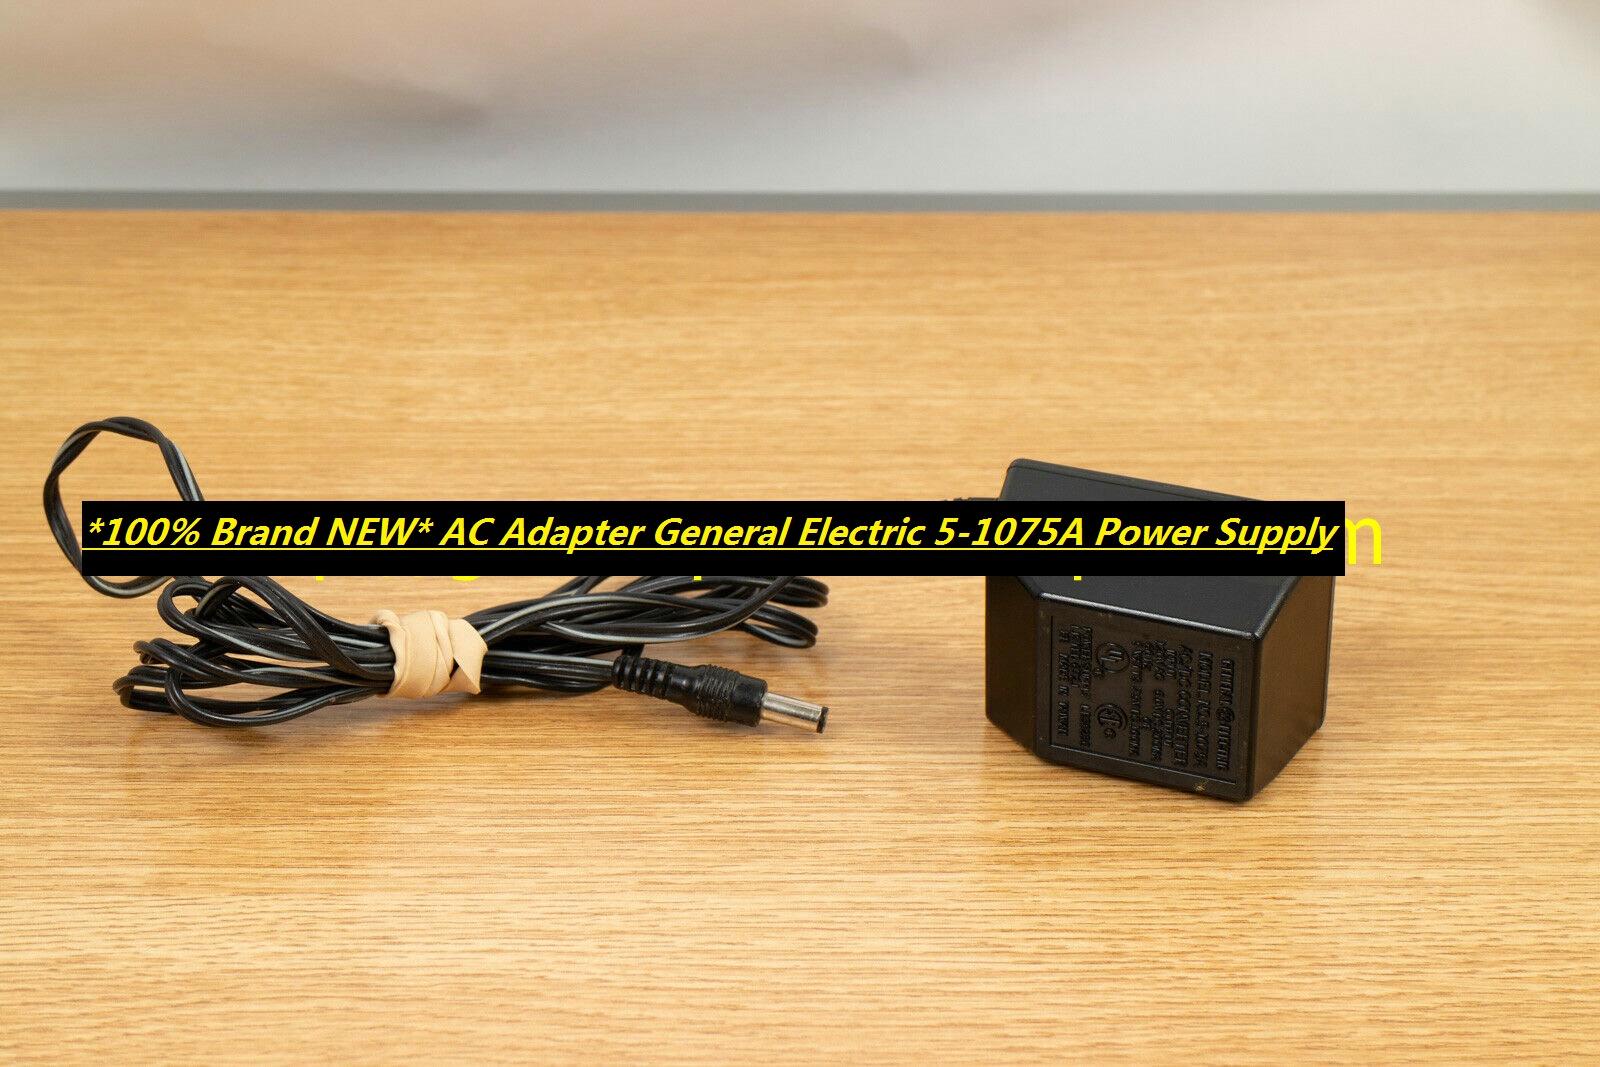 *100% Brand NEW* AC Adapter General Electric 5-1075A Power Supply